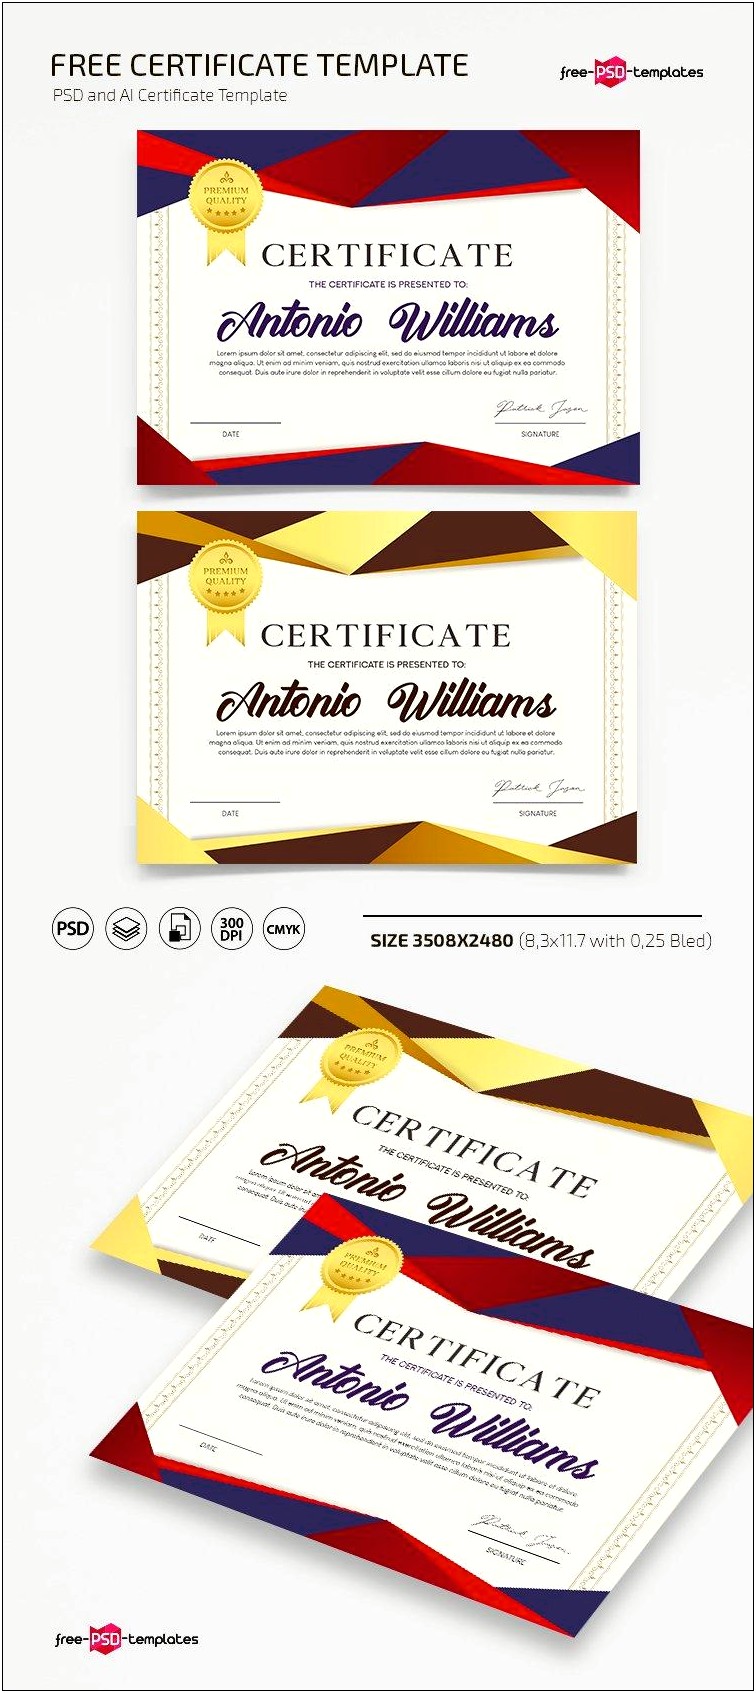 Certificate Templates For Photoshop Cs3 Free Download